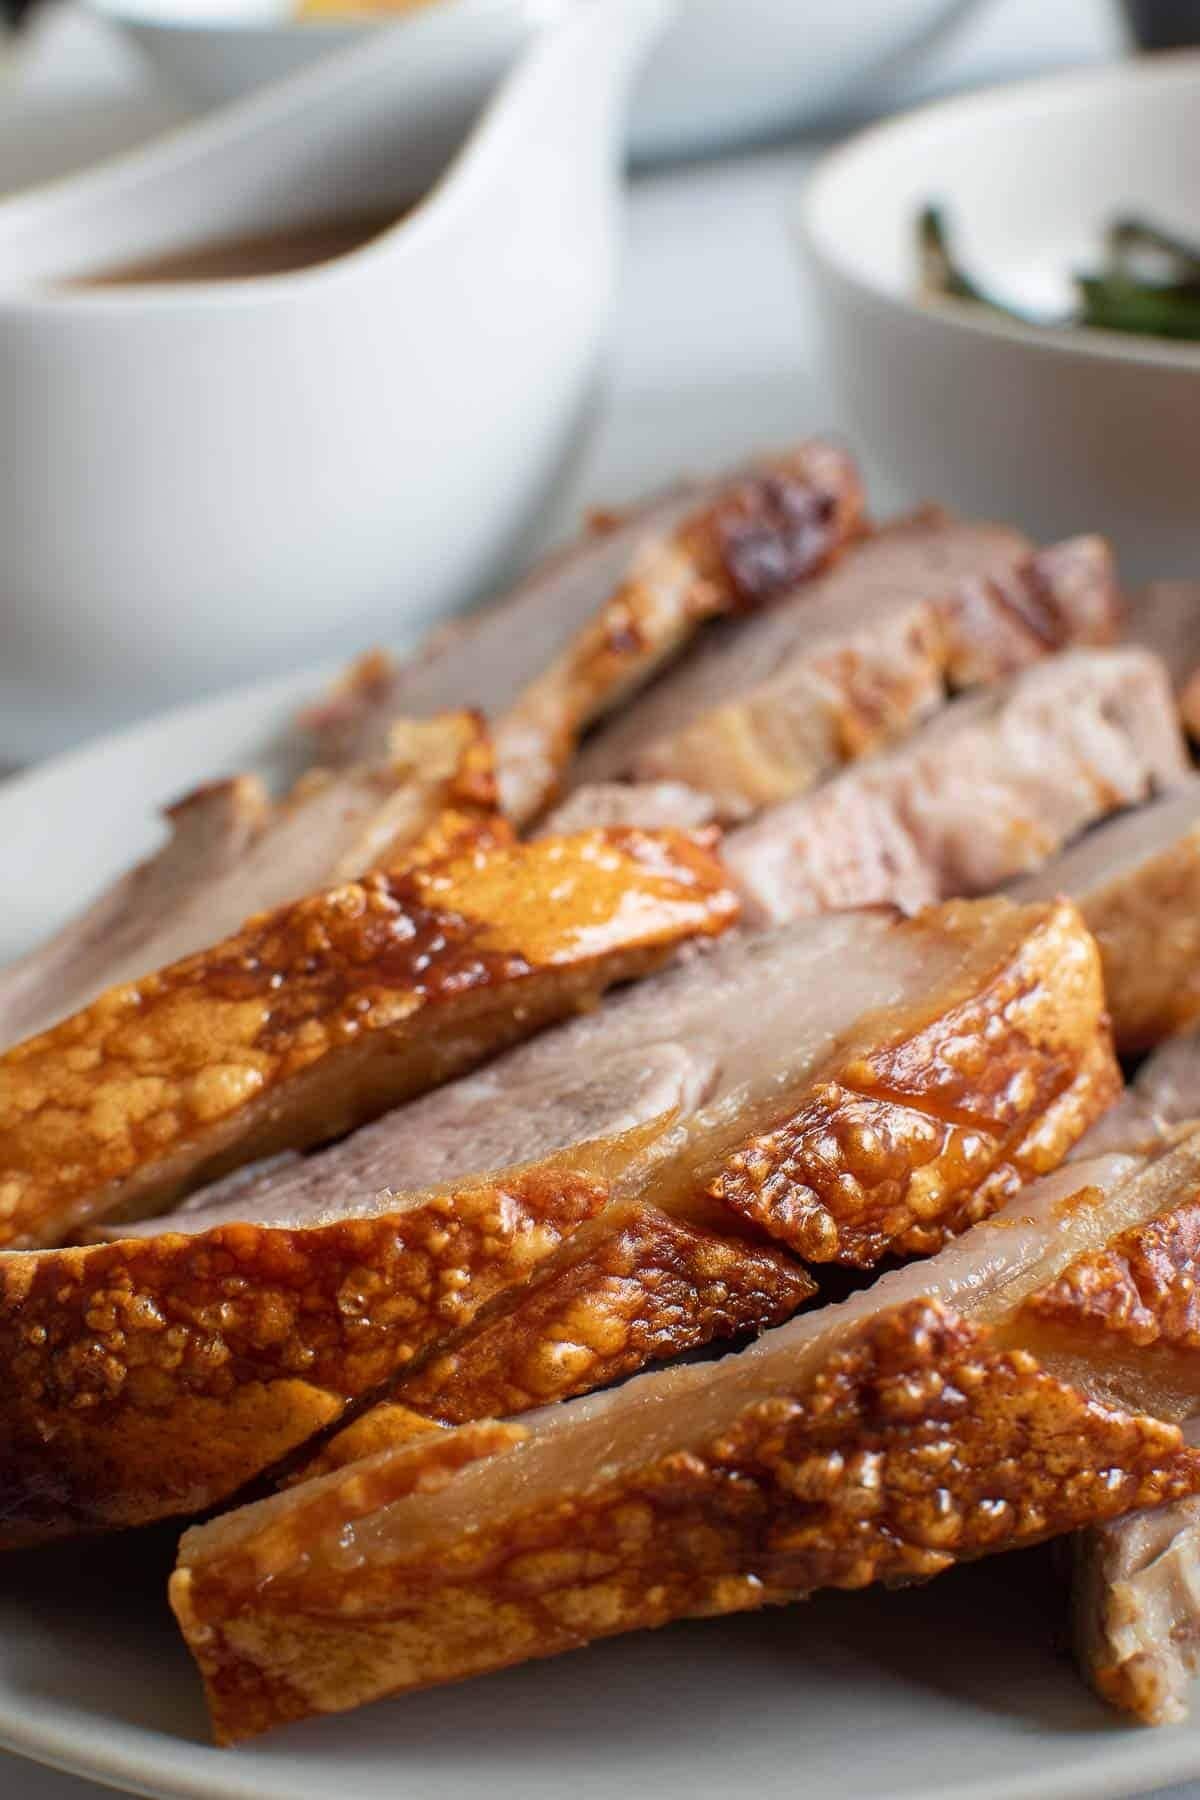 Slices of homemade Air Fryer Pork Roast with gravy on the side